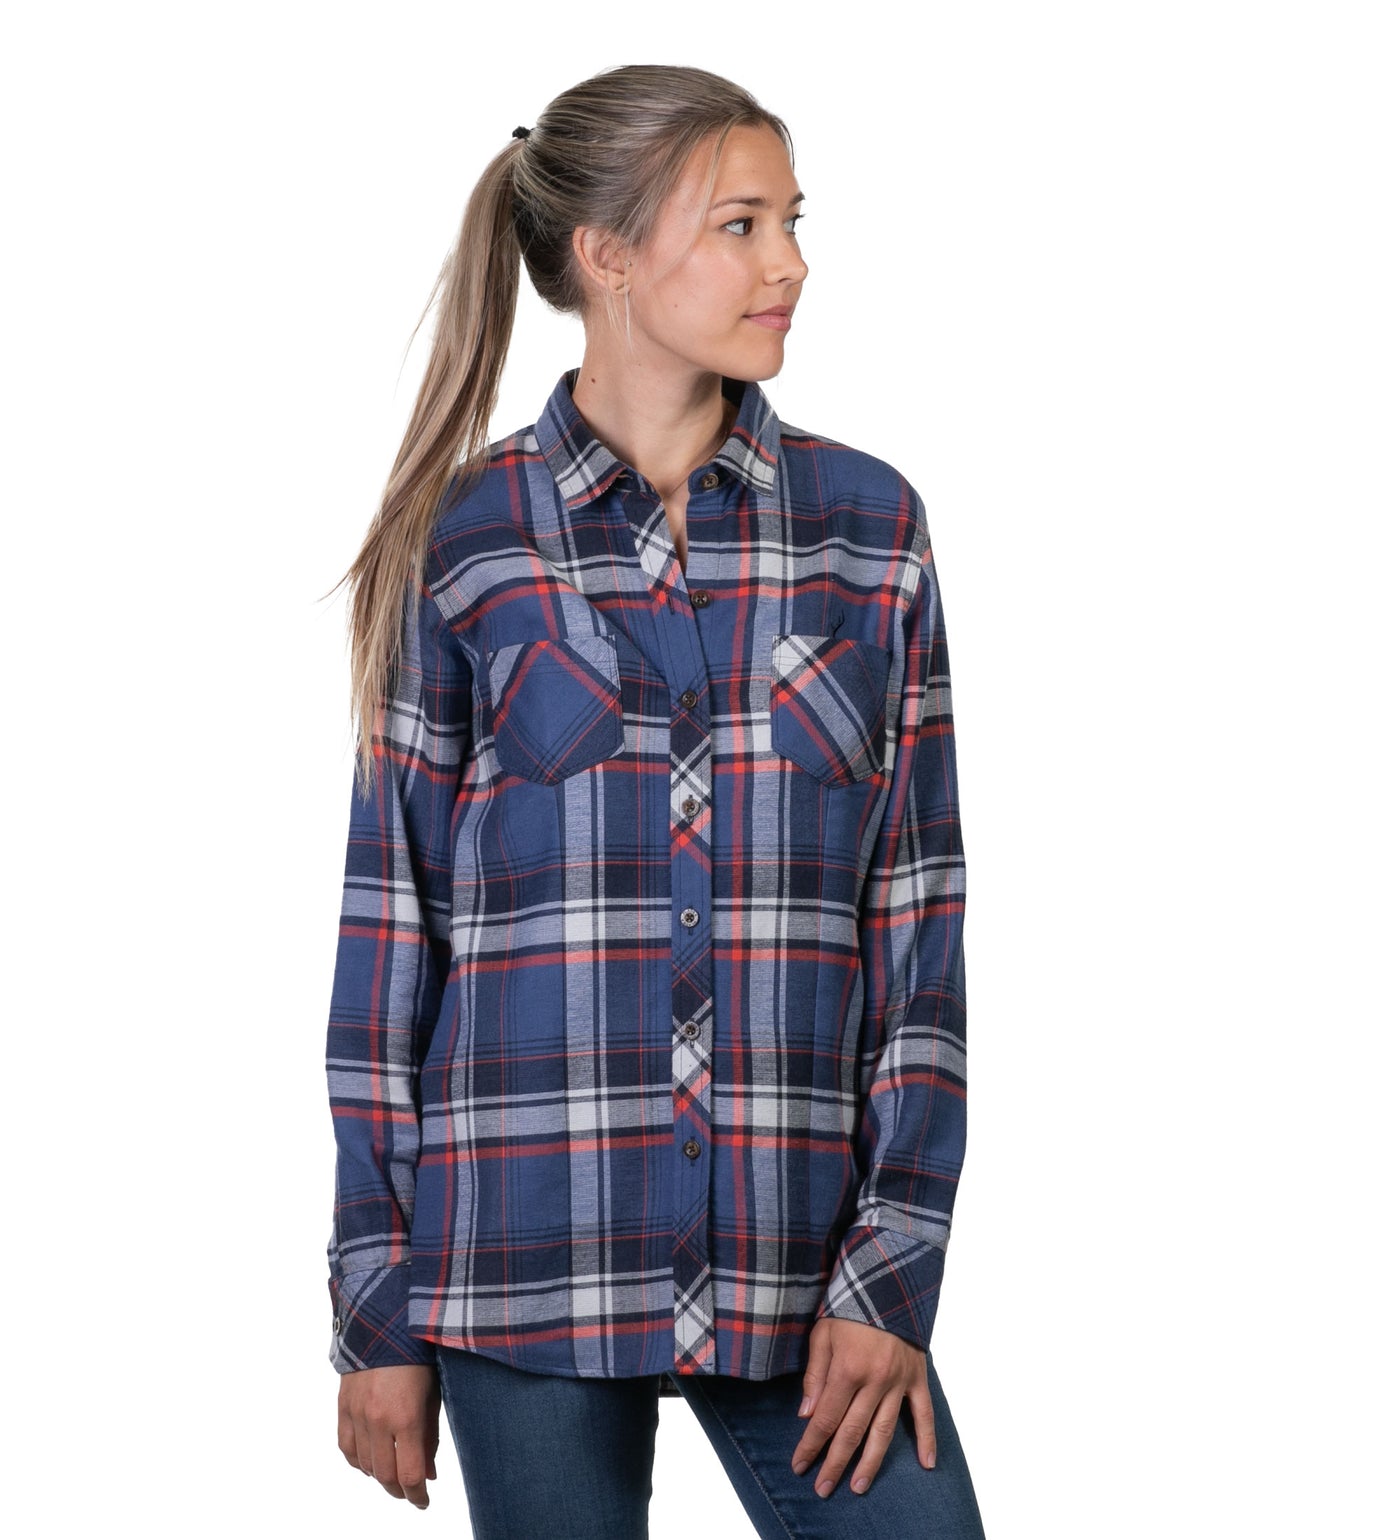 Women's Every Day Double Weave Shirt- Sunset Blue